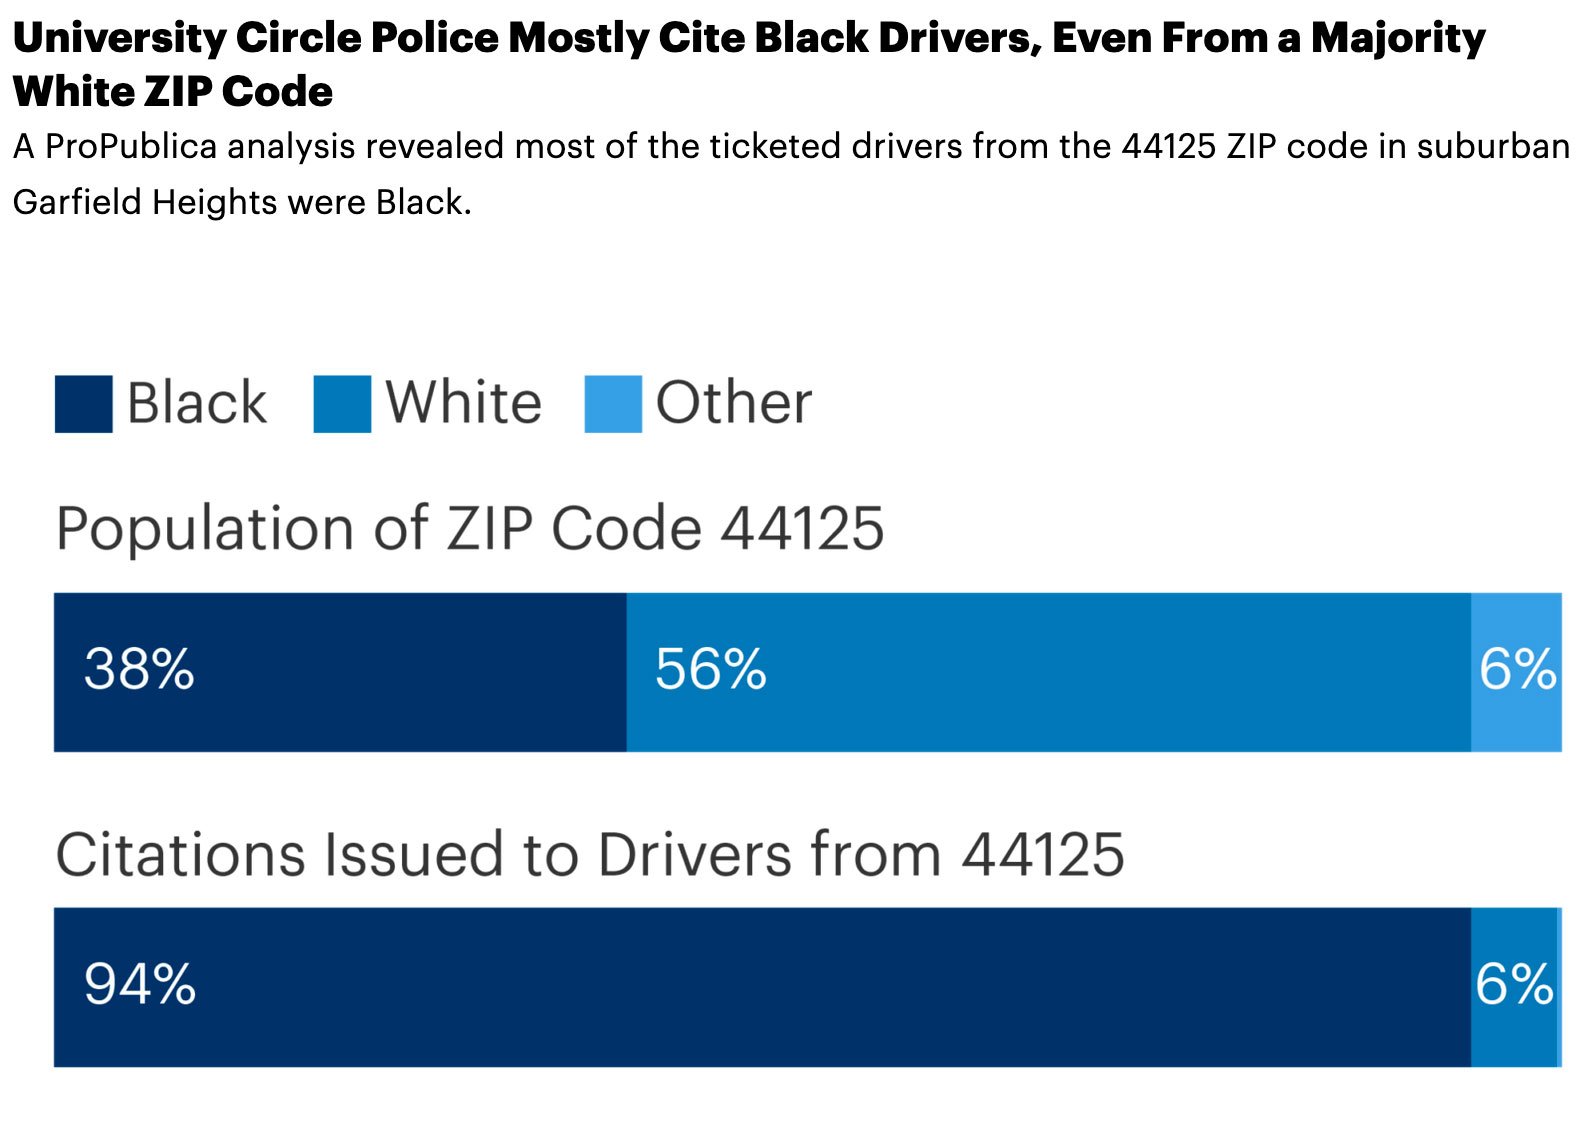 Source: Census data and Cleveland Municipal Court records. Note: 0.3% of citations were issued to drivers who were not categorized as either white or Black. 